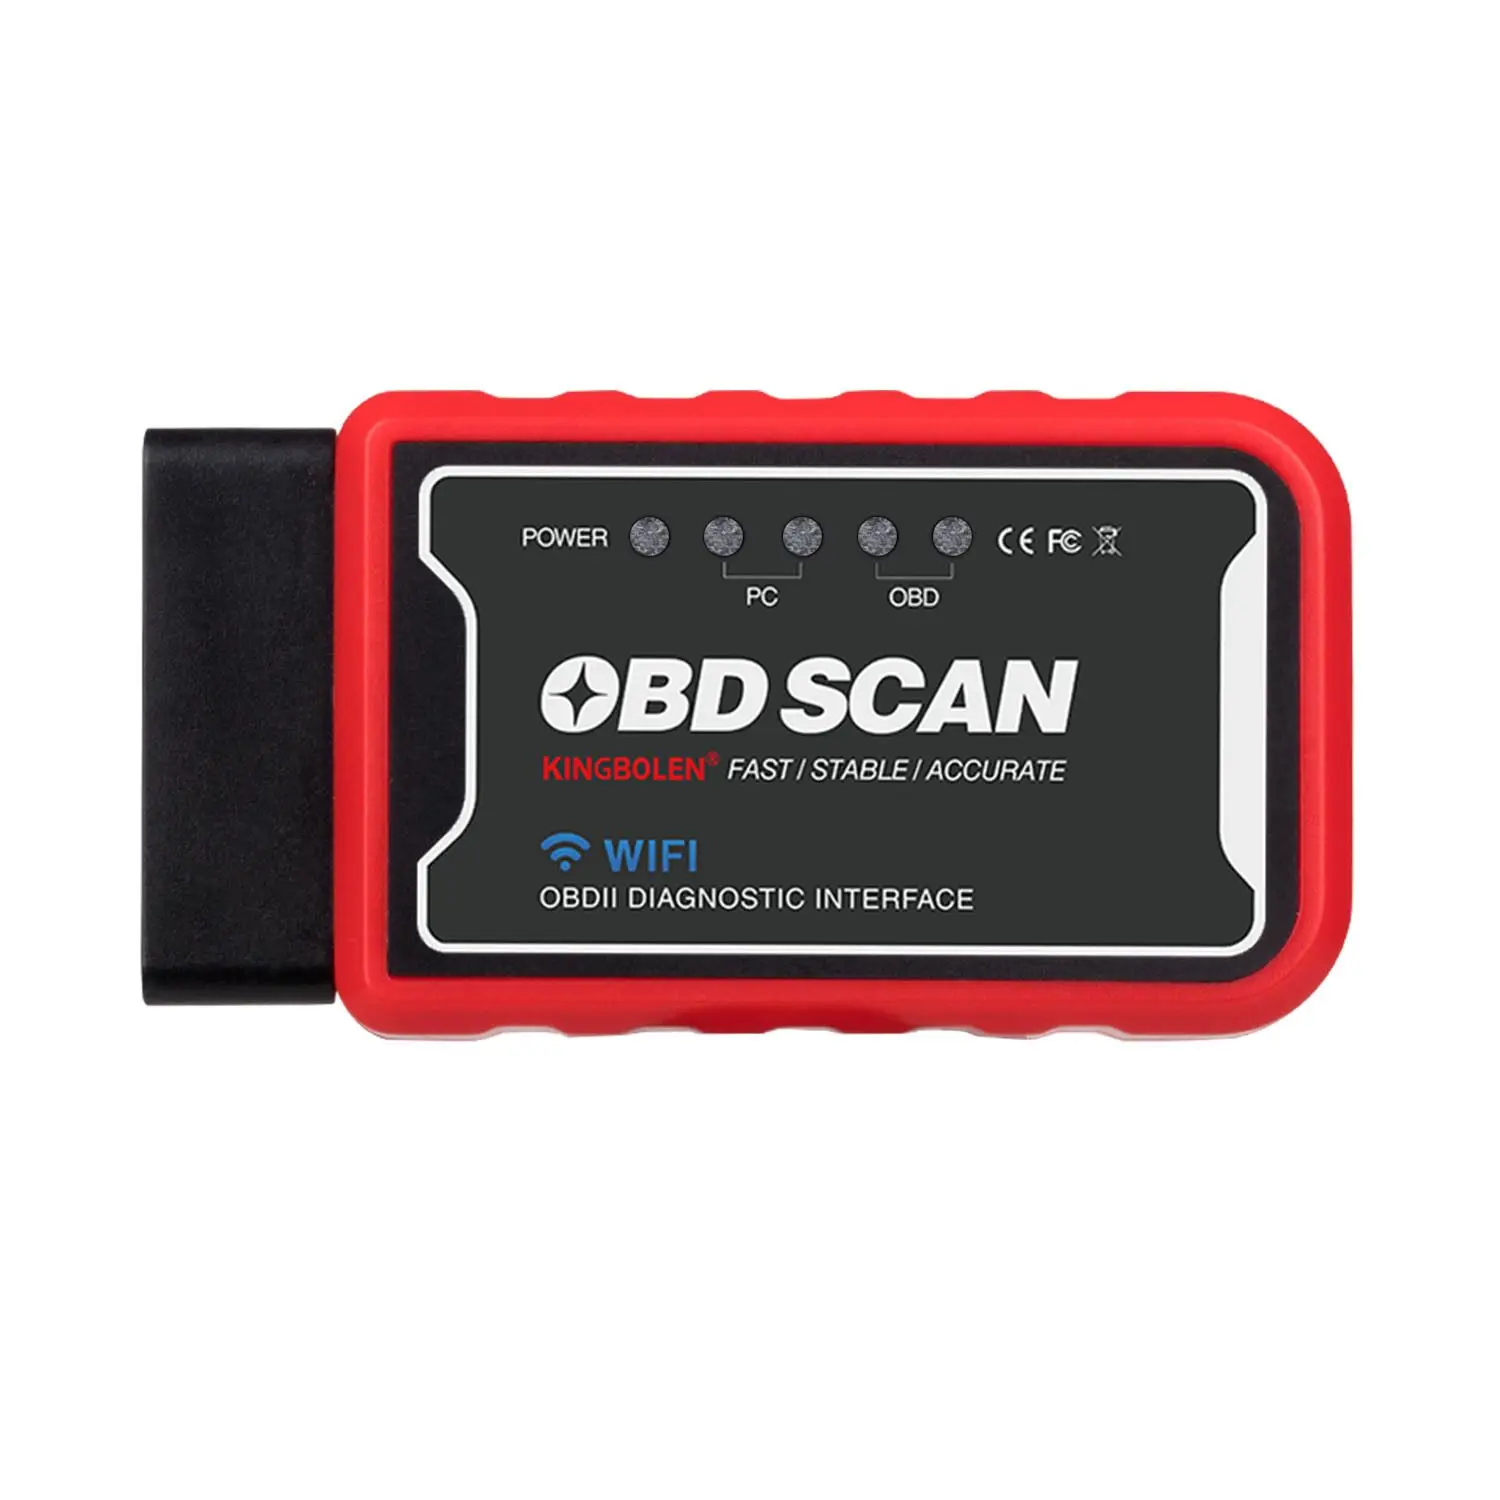 High quality OBD II ELM327 V1.5 SCAN car fault diagnosis for Android & Apple iOS PIC25K80 chip OBD2 ELM 327 tester free ship